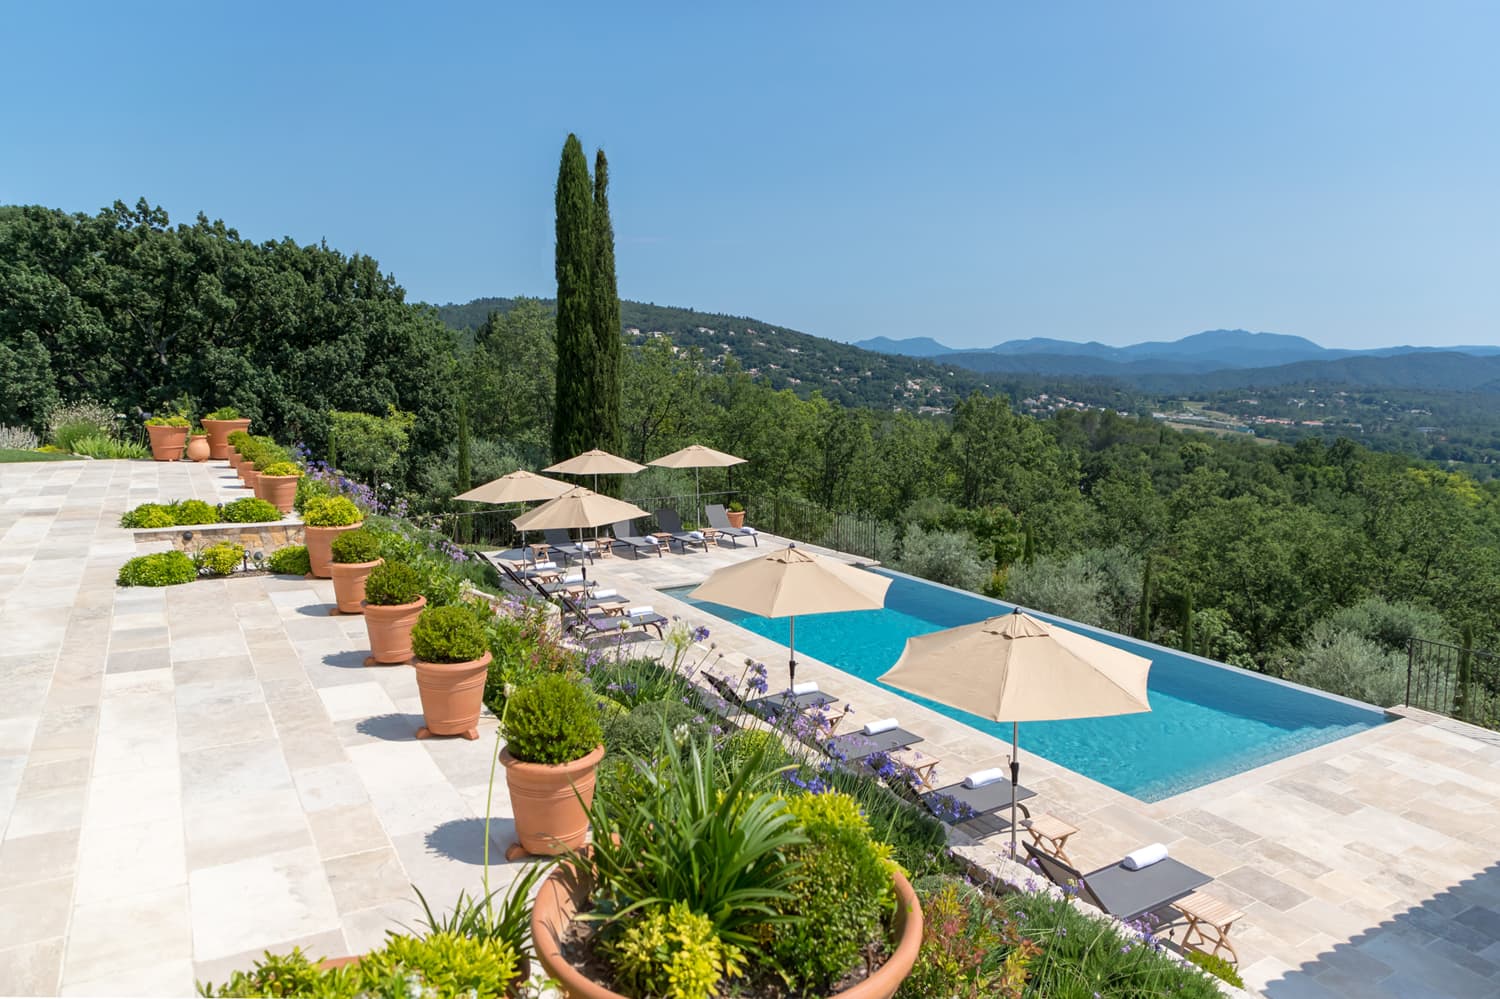 Provençal holiday rental home with private pool and views | Le Grand Mas de Valcros